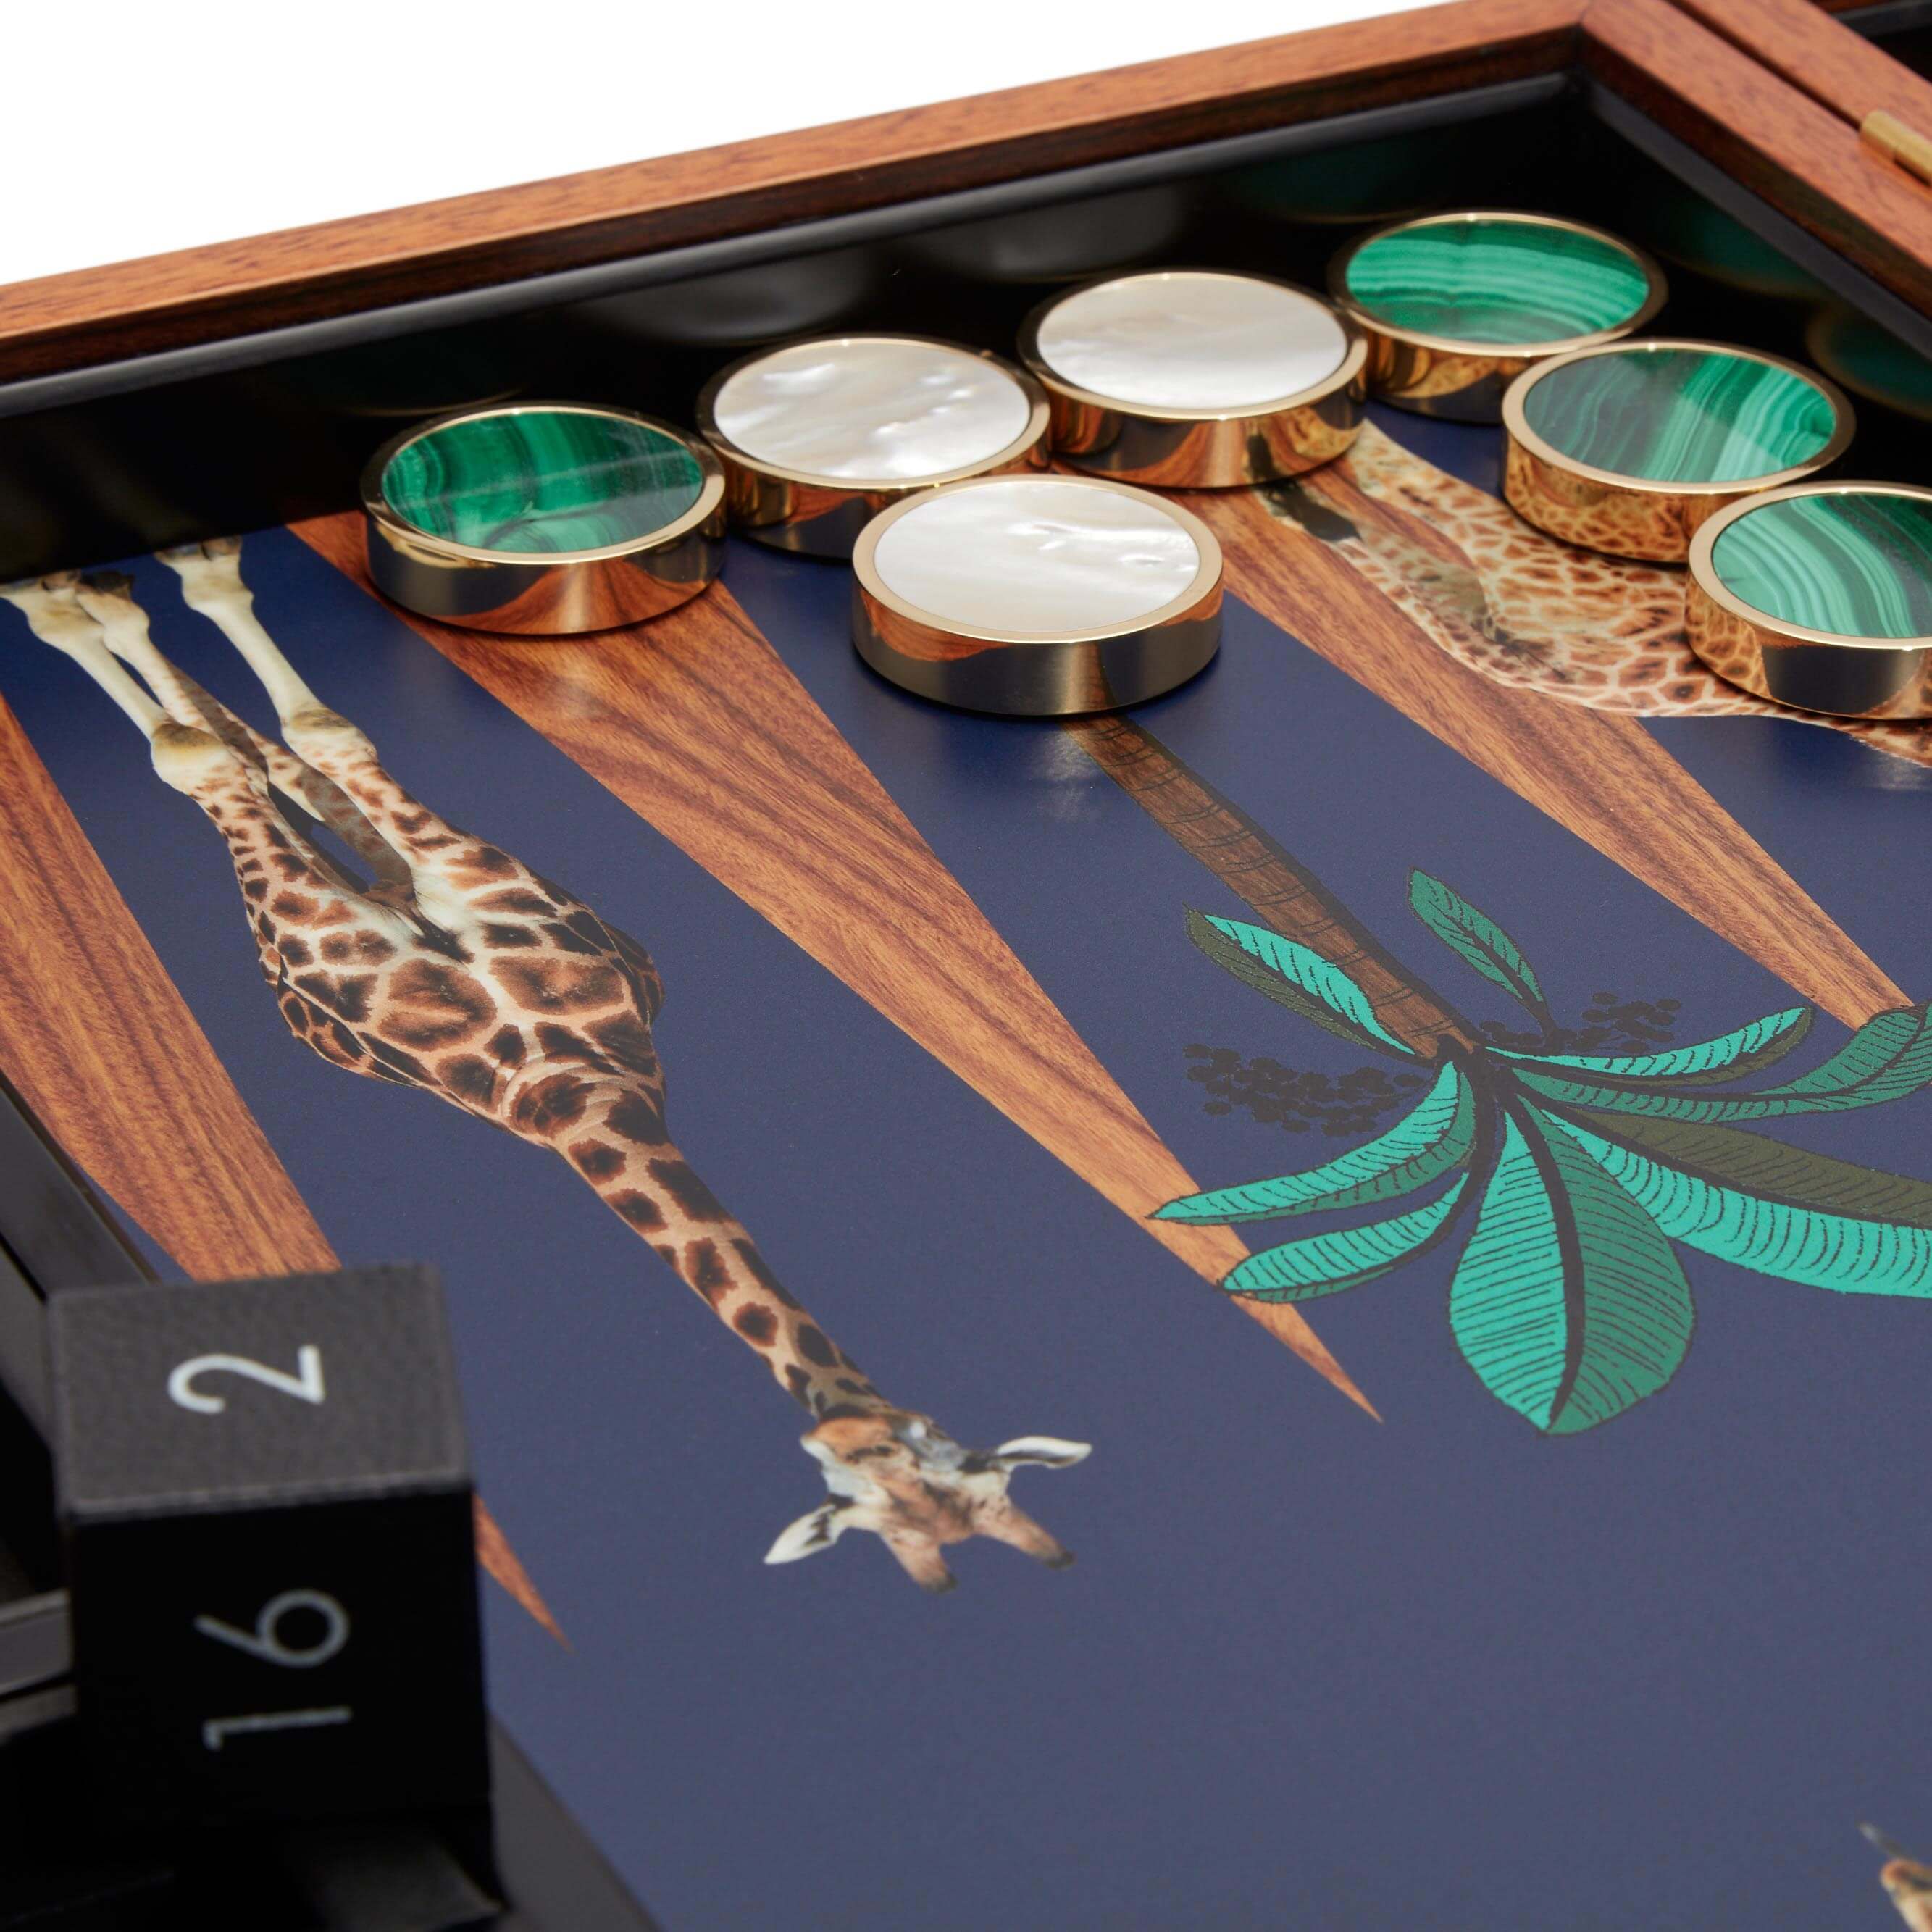 Giraffe backgammon set in a Rose Wood box with Malachite and Mother of Pearl playing pieces